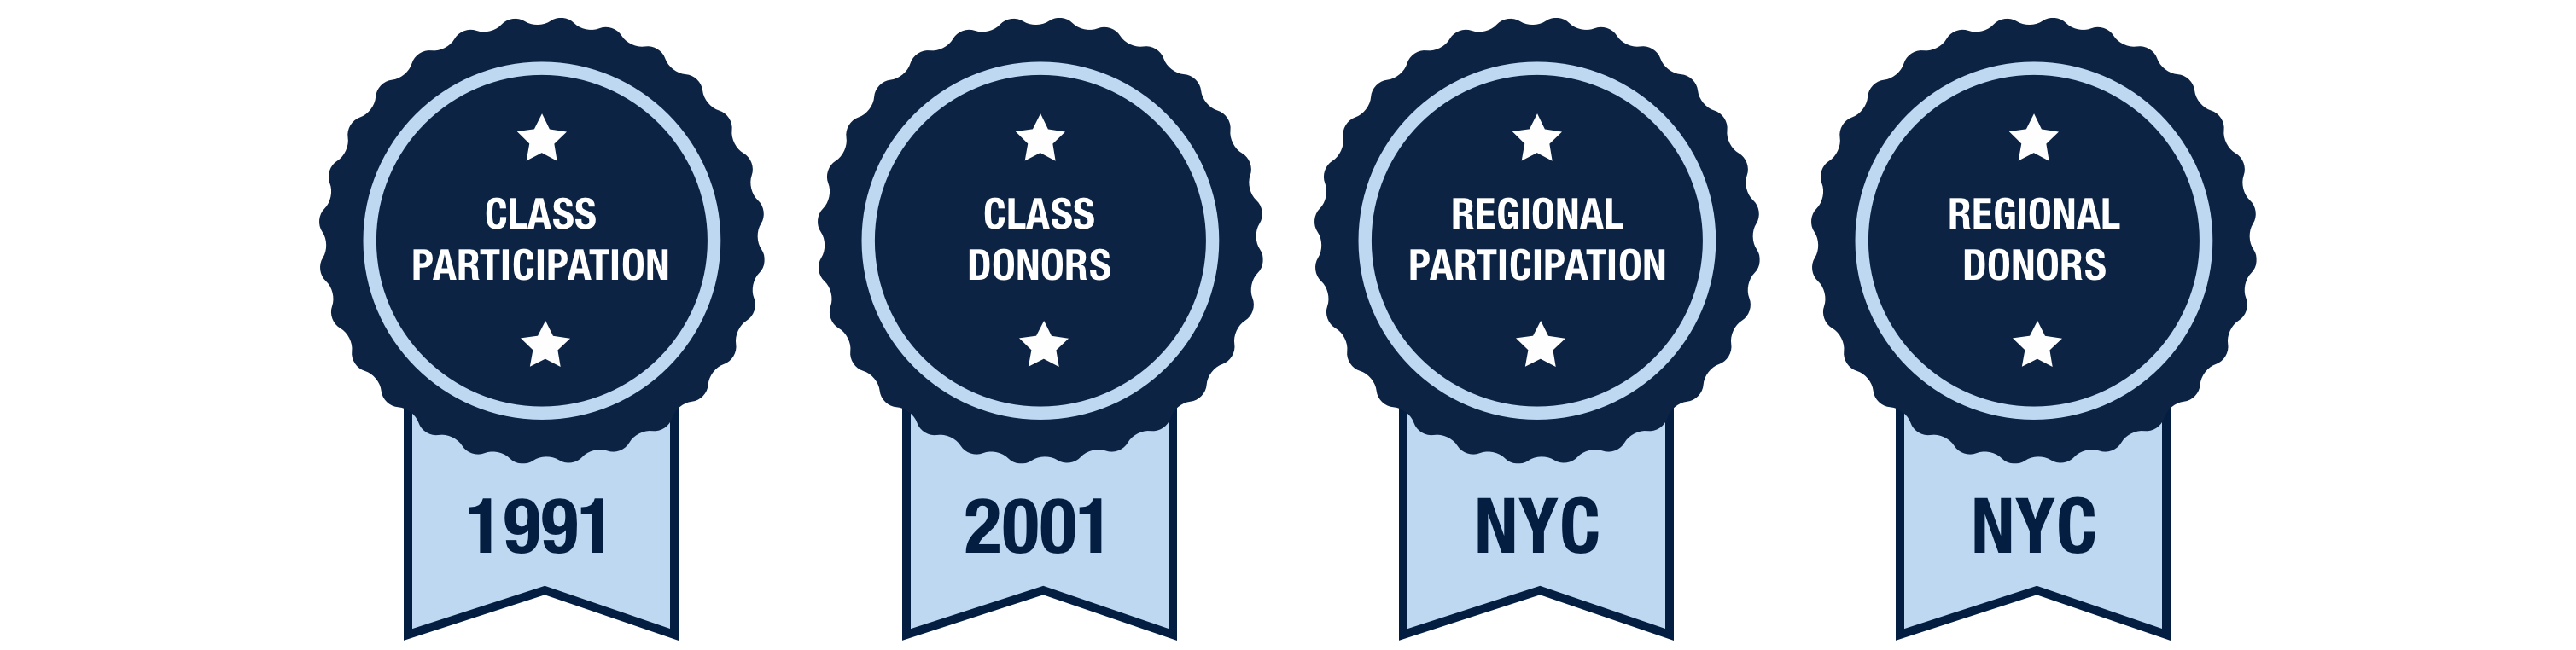 Blue and Gray Day 2021 winners. Class participation: 1991; Class donors: 2001; Regional participation: NYC; Regional donors: NYC.